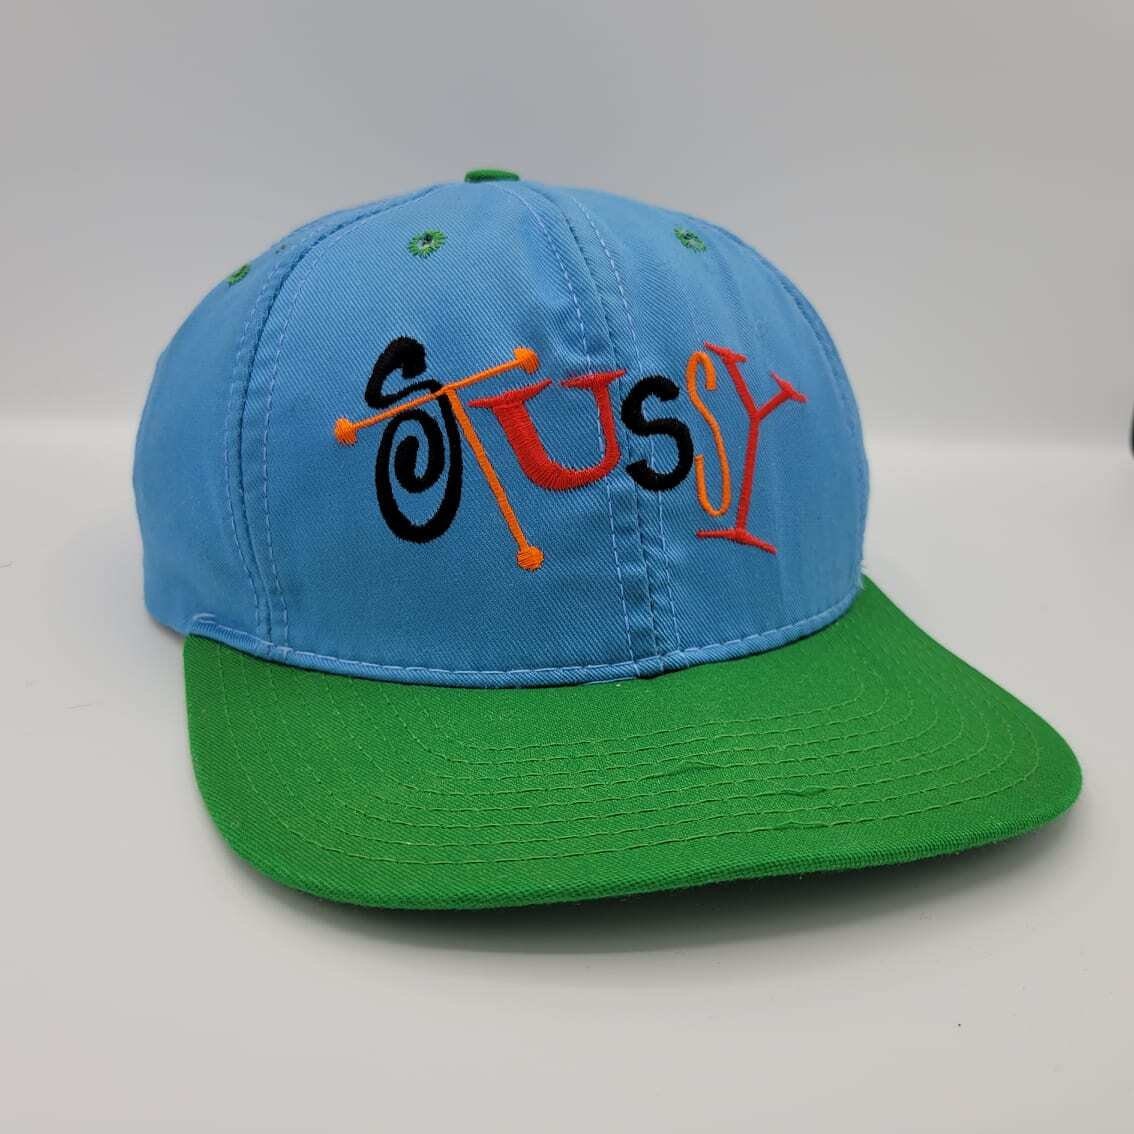 Stussy Vintage 90s Snapback Blue and Green Baseball Style Cap Stitched |  Shop THRILLING